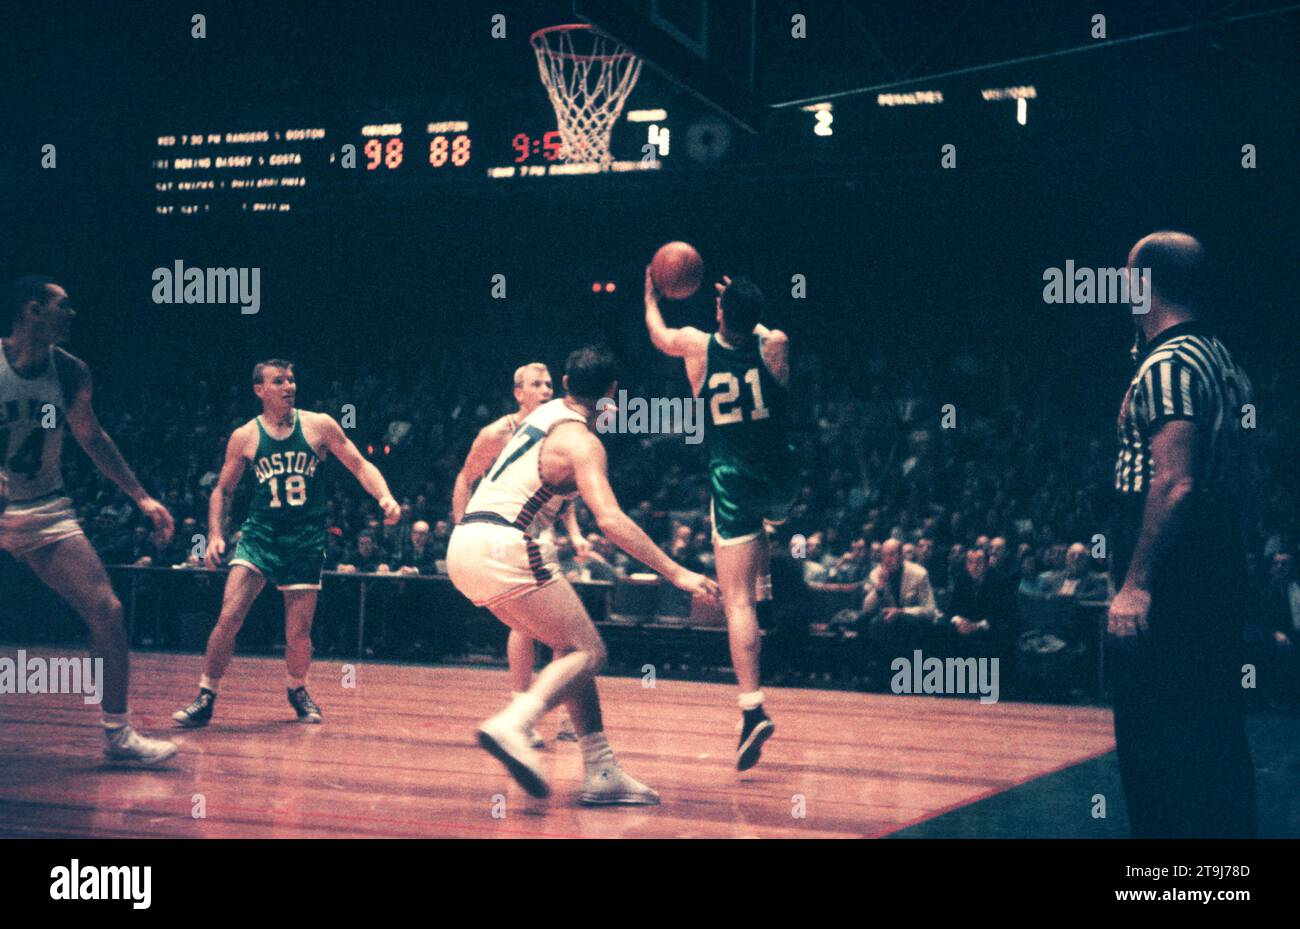 NEW YORK, NY - OCTOBER 25: Bill Sharman #21 of the Boston Celtics goes for the lay-up as Ron Sobie #17 of the New York Knicks defends during an NBA game on October 25, 1958 at the Madison Square Garden in New York, New York.  (Photo by Hy Peskin) *** Local Caption *** Bill Sharman;Ron Sobie Stock Photo